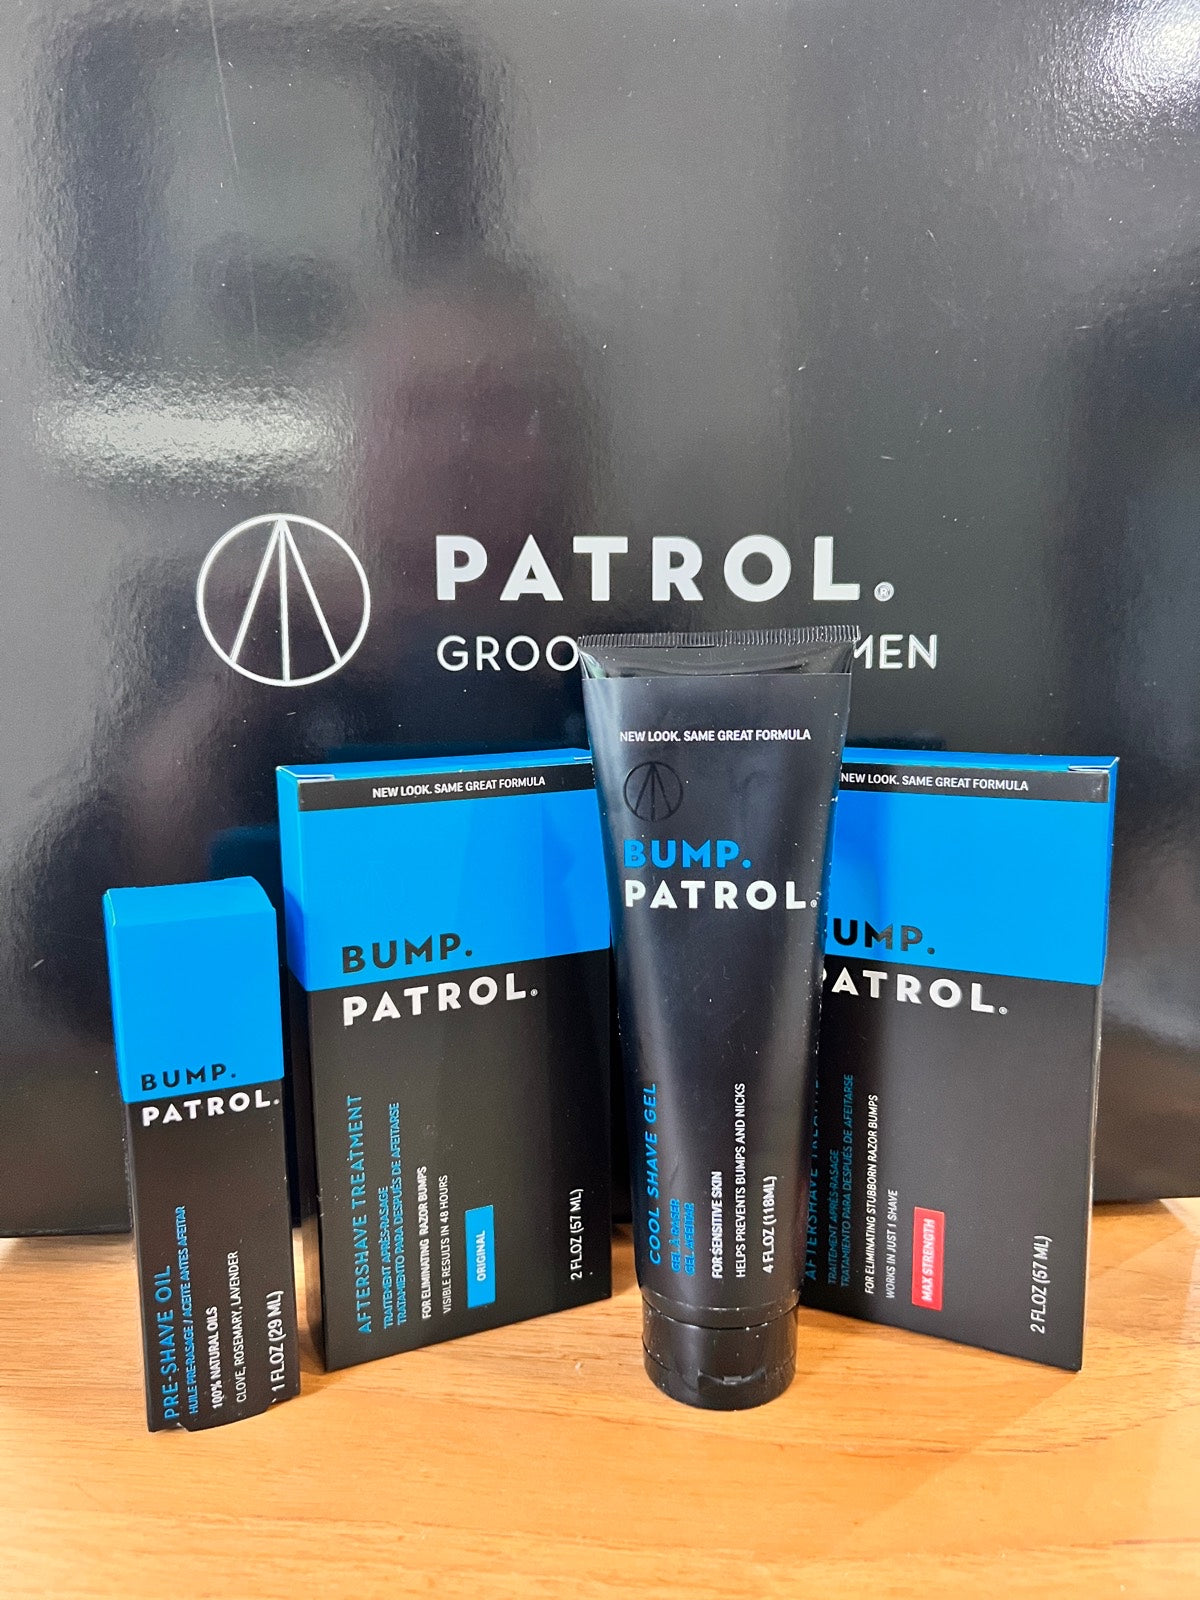 The Science Behind Razor Bumps and Ingrown Hairs: How Patrol Grooming's Bump Patrol Line Offers Solutions